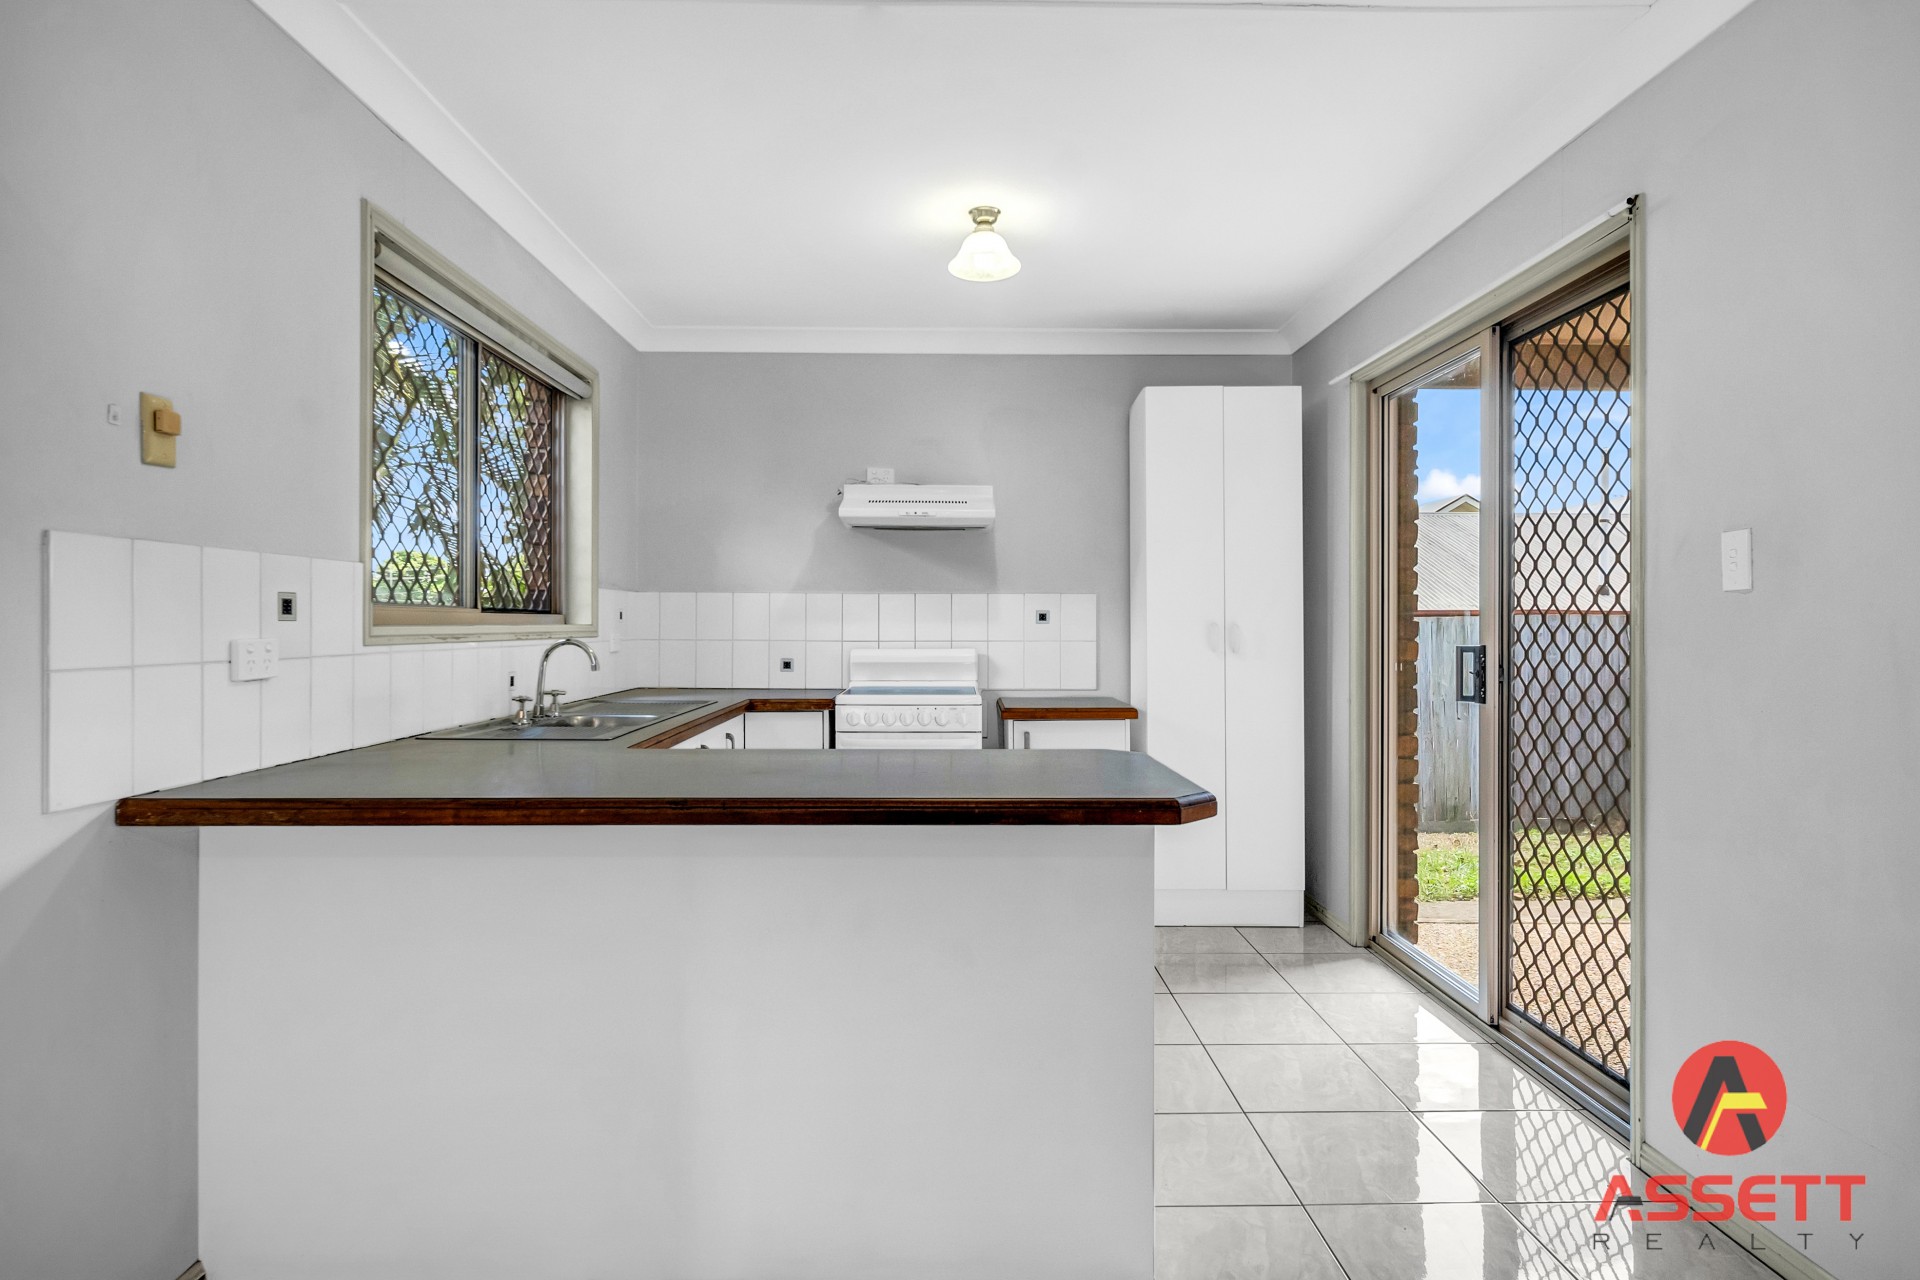 Selling your property in Bellbird Park